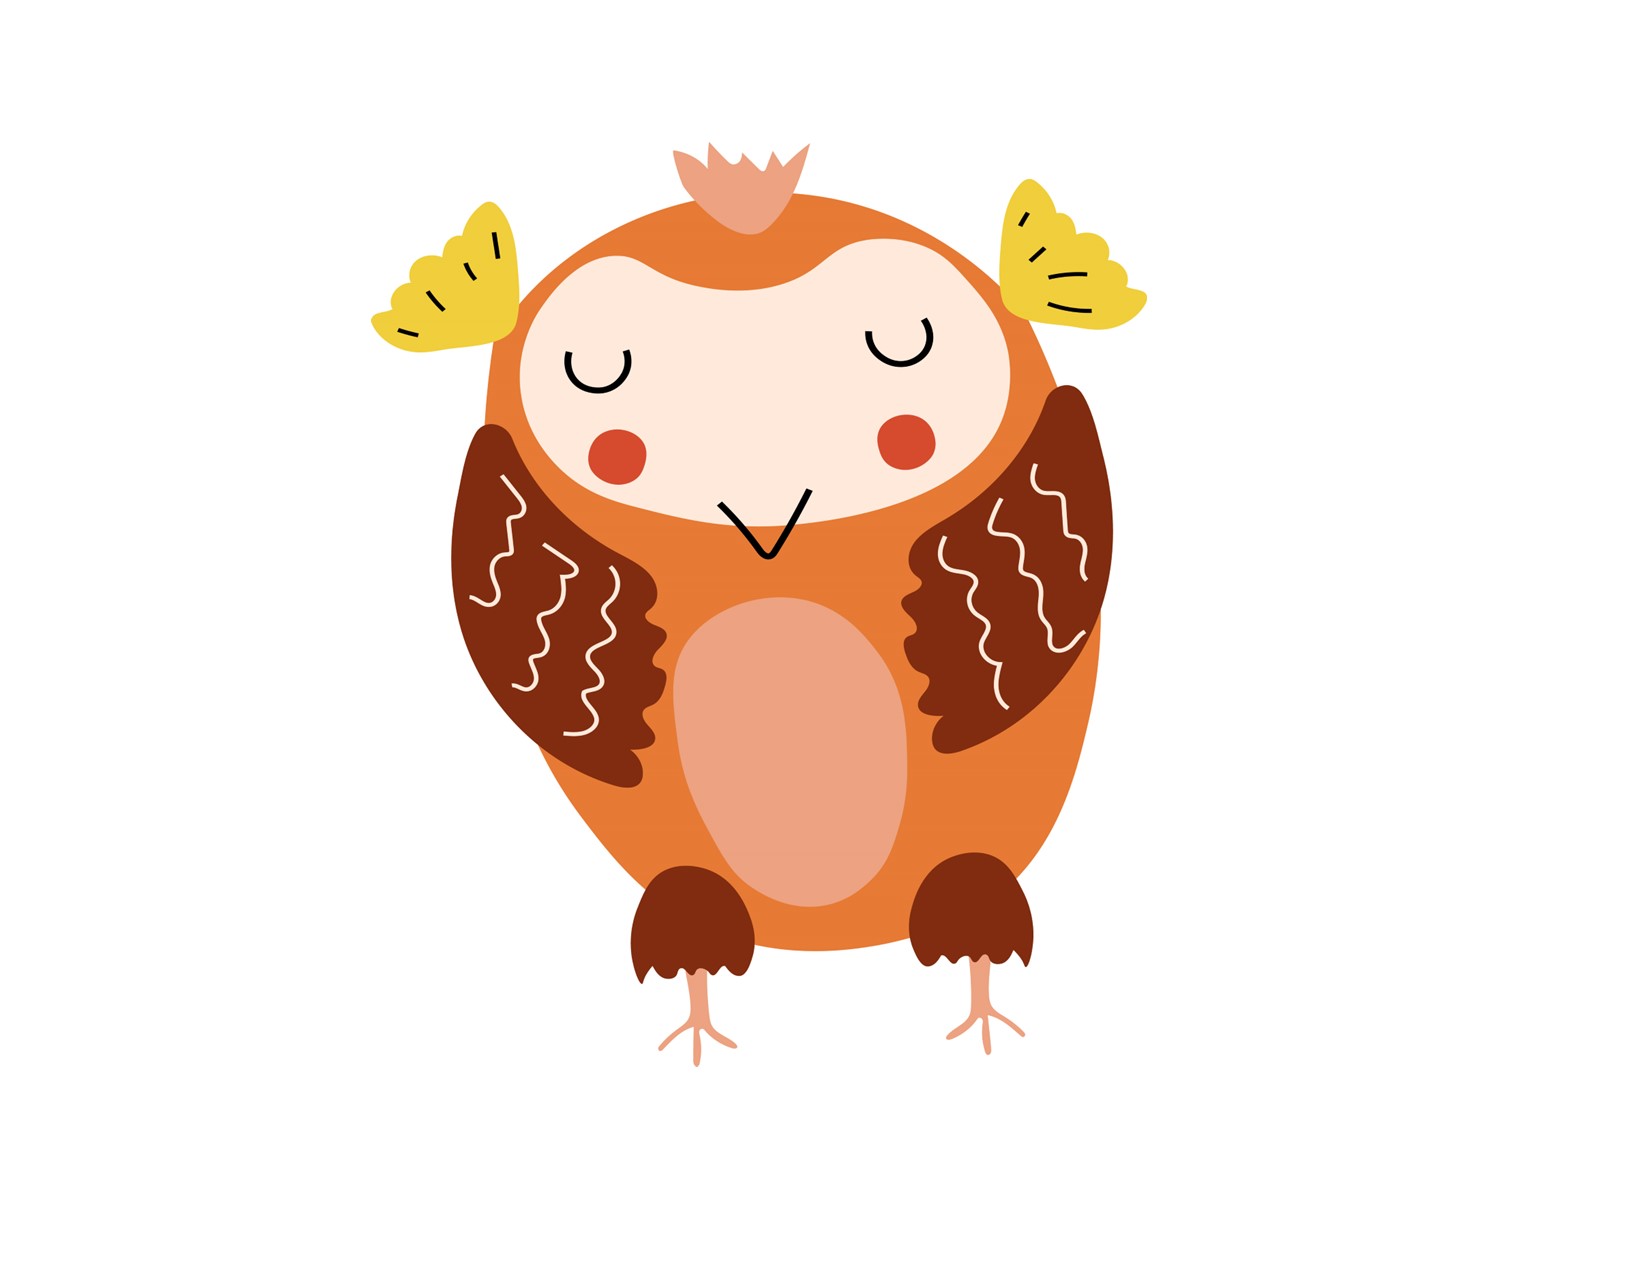 smiling orange owl with brown wings and feet, yellow ears, pink belly and hair tuft